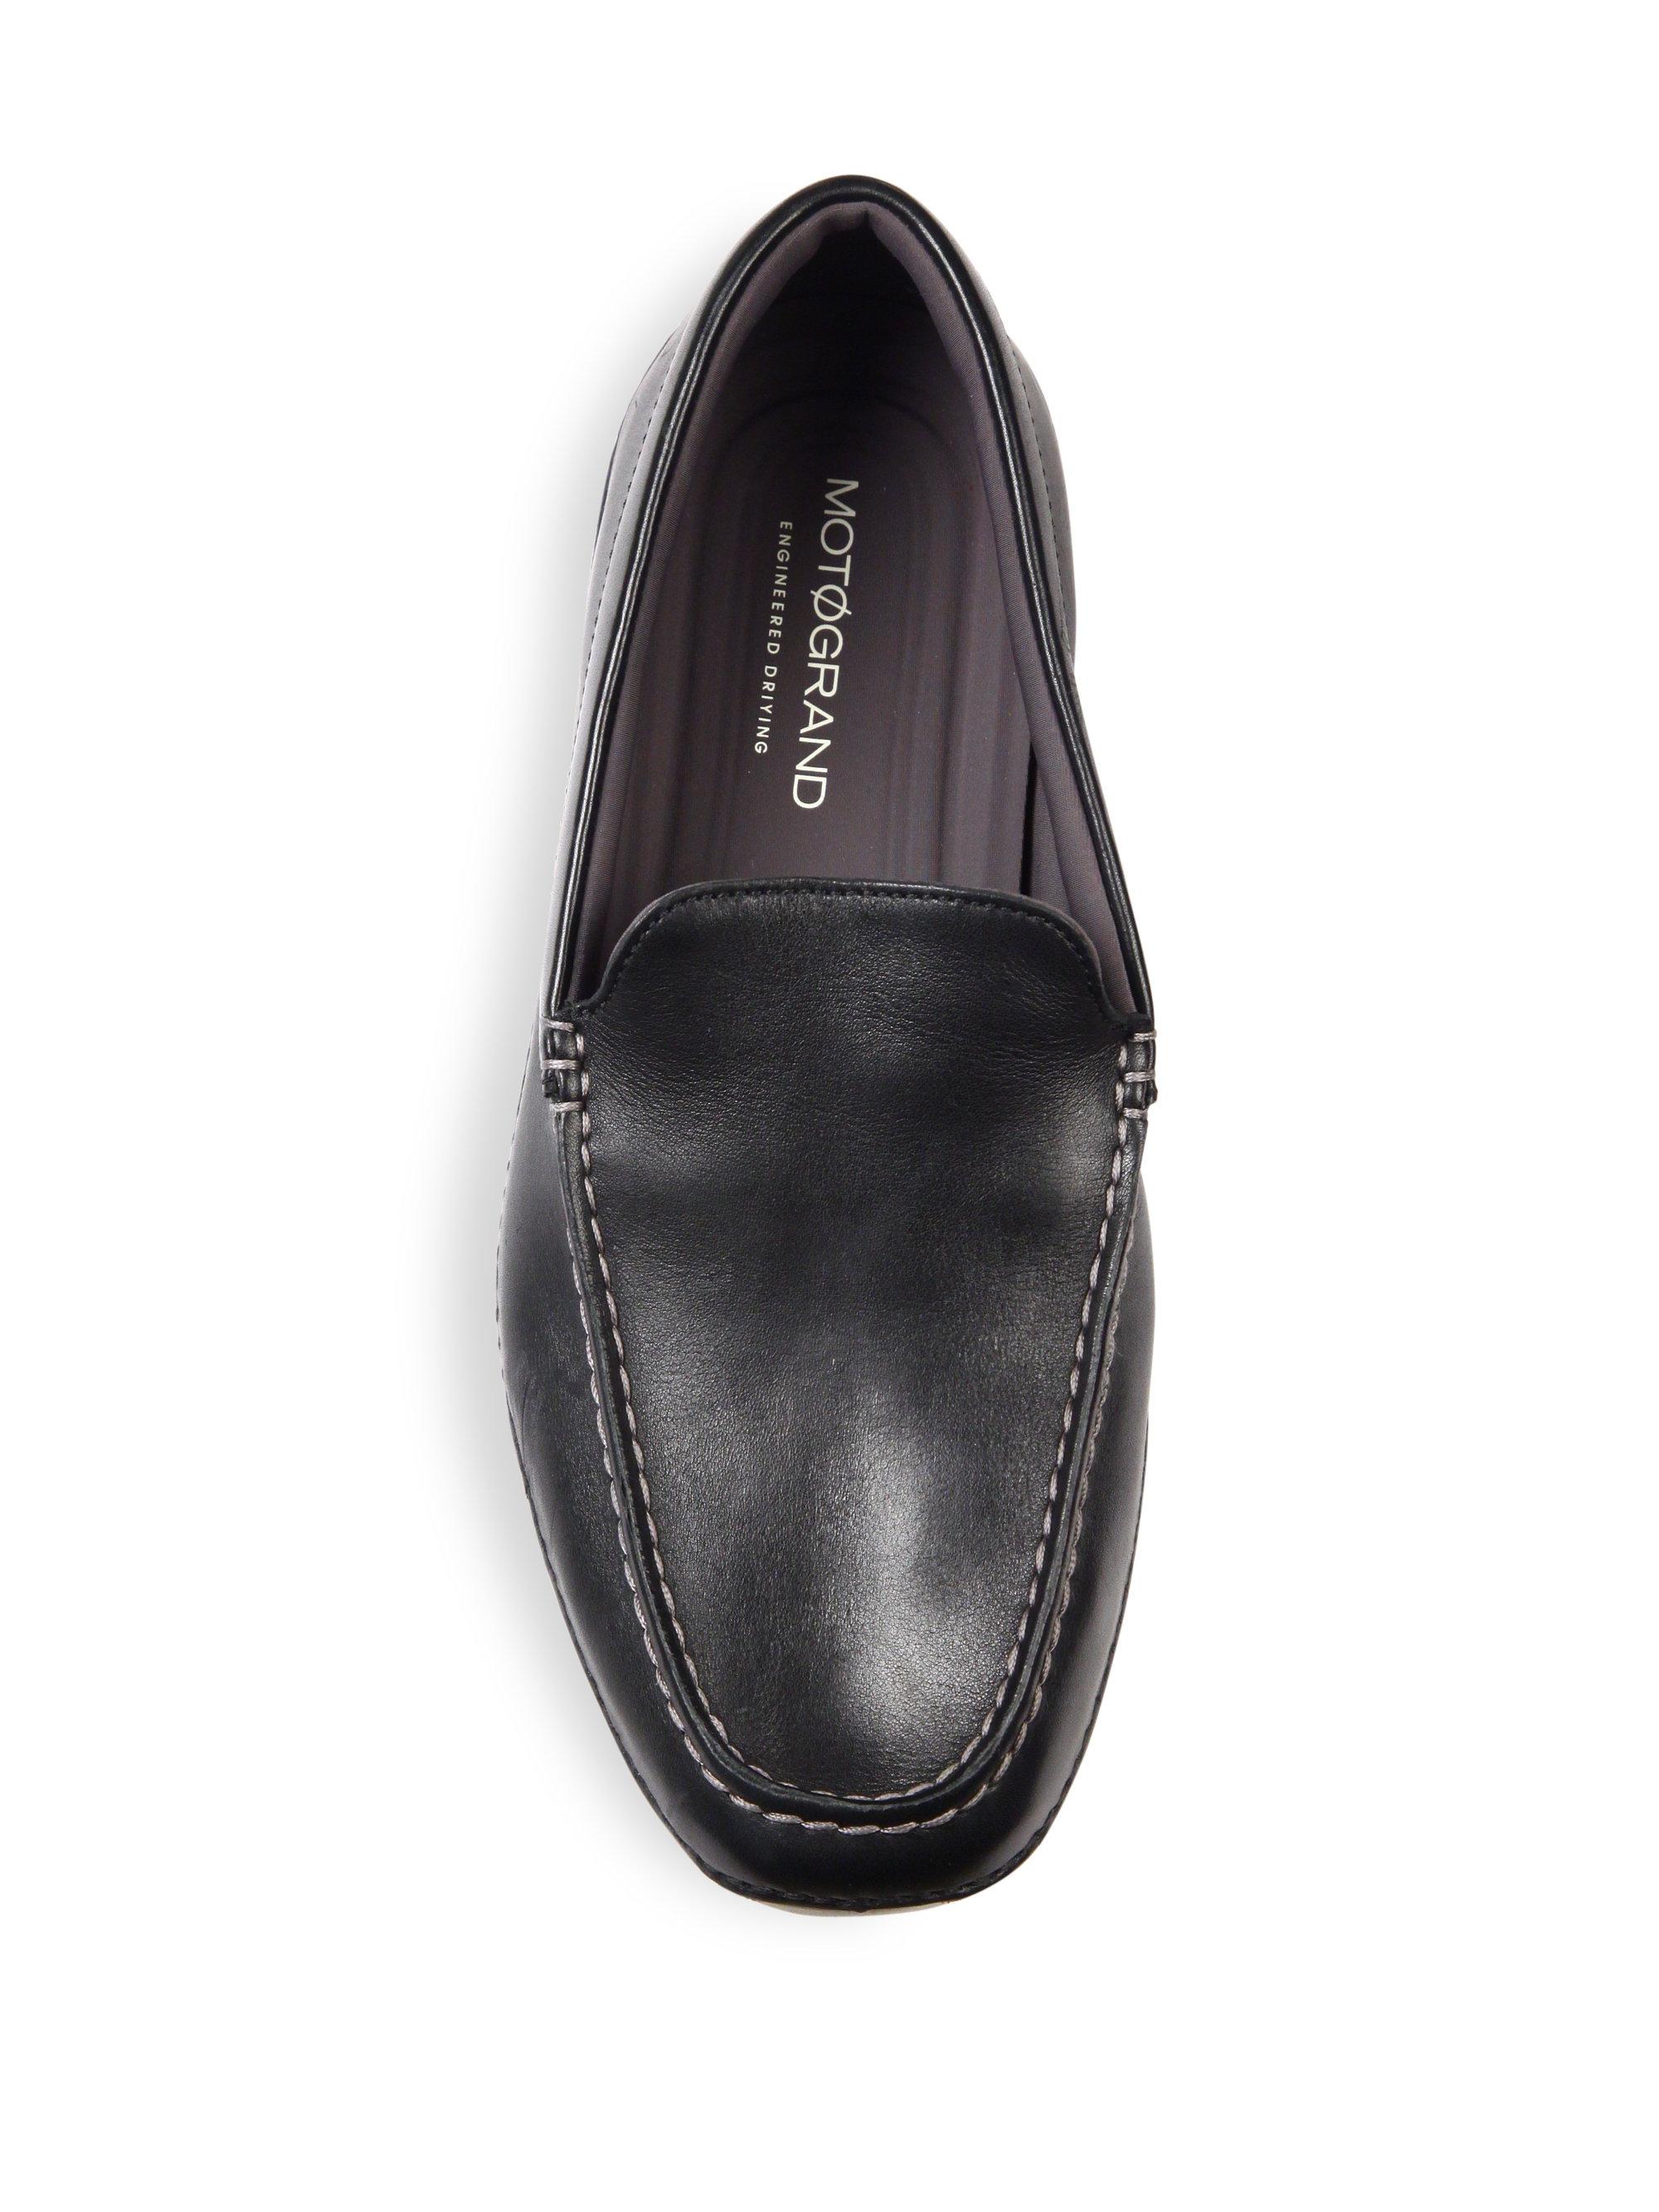 Cole Haan Leather Venetian Loafers in Black - Lyst